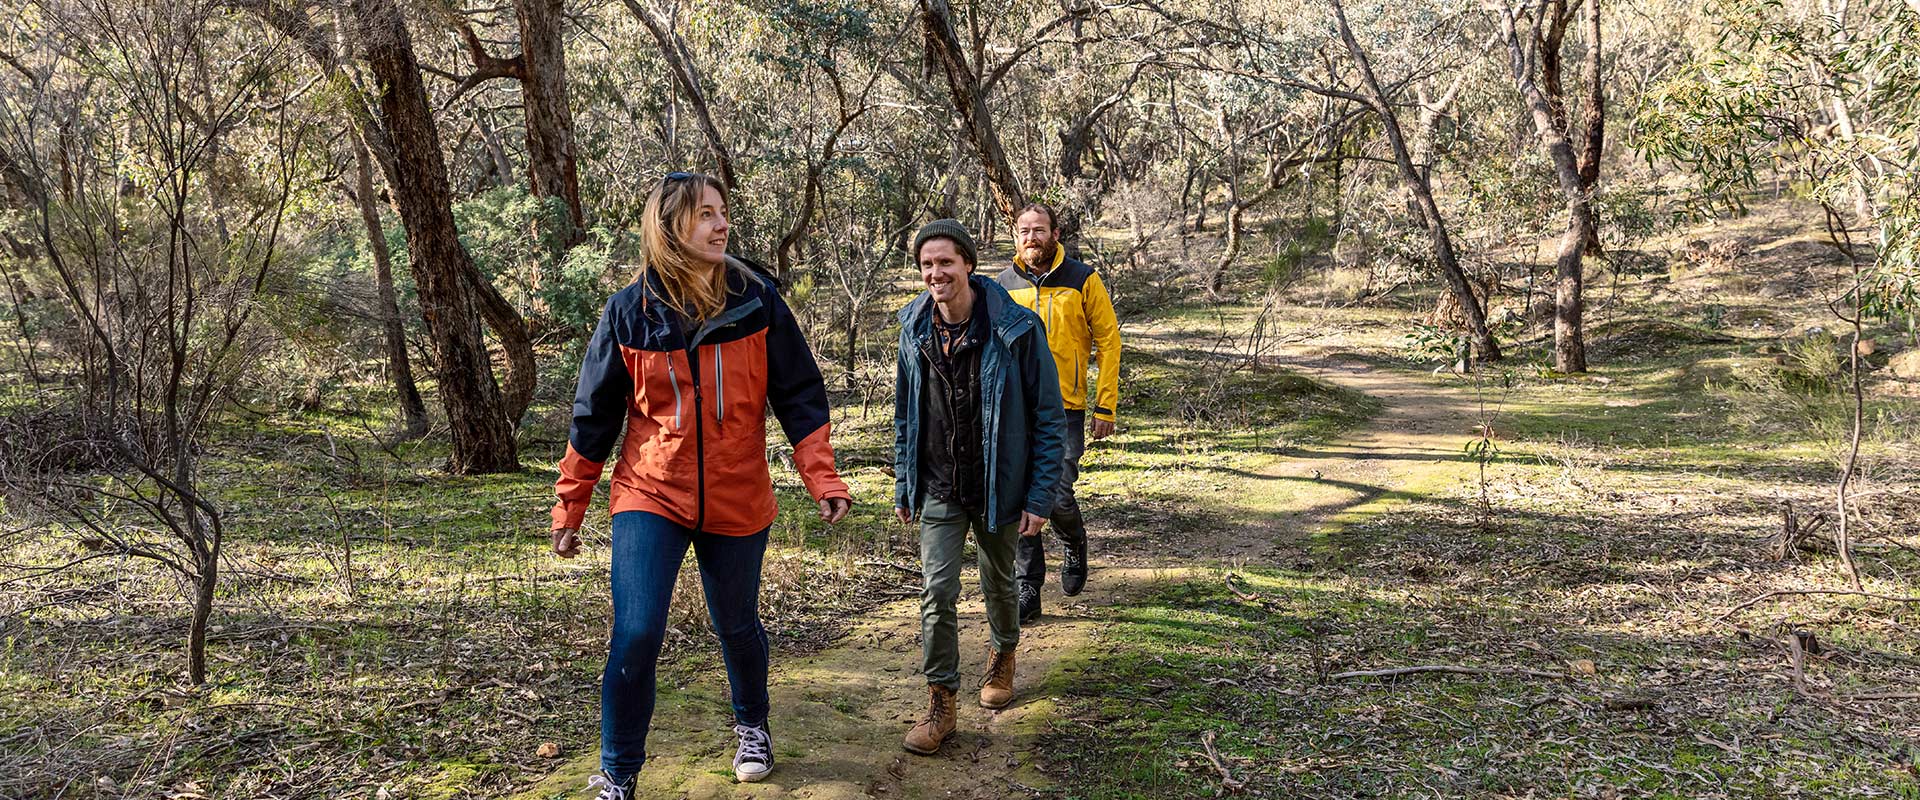 A small group of hikers walk along a dirt trail amongst rugged bushland